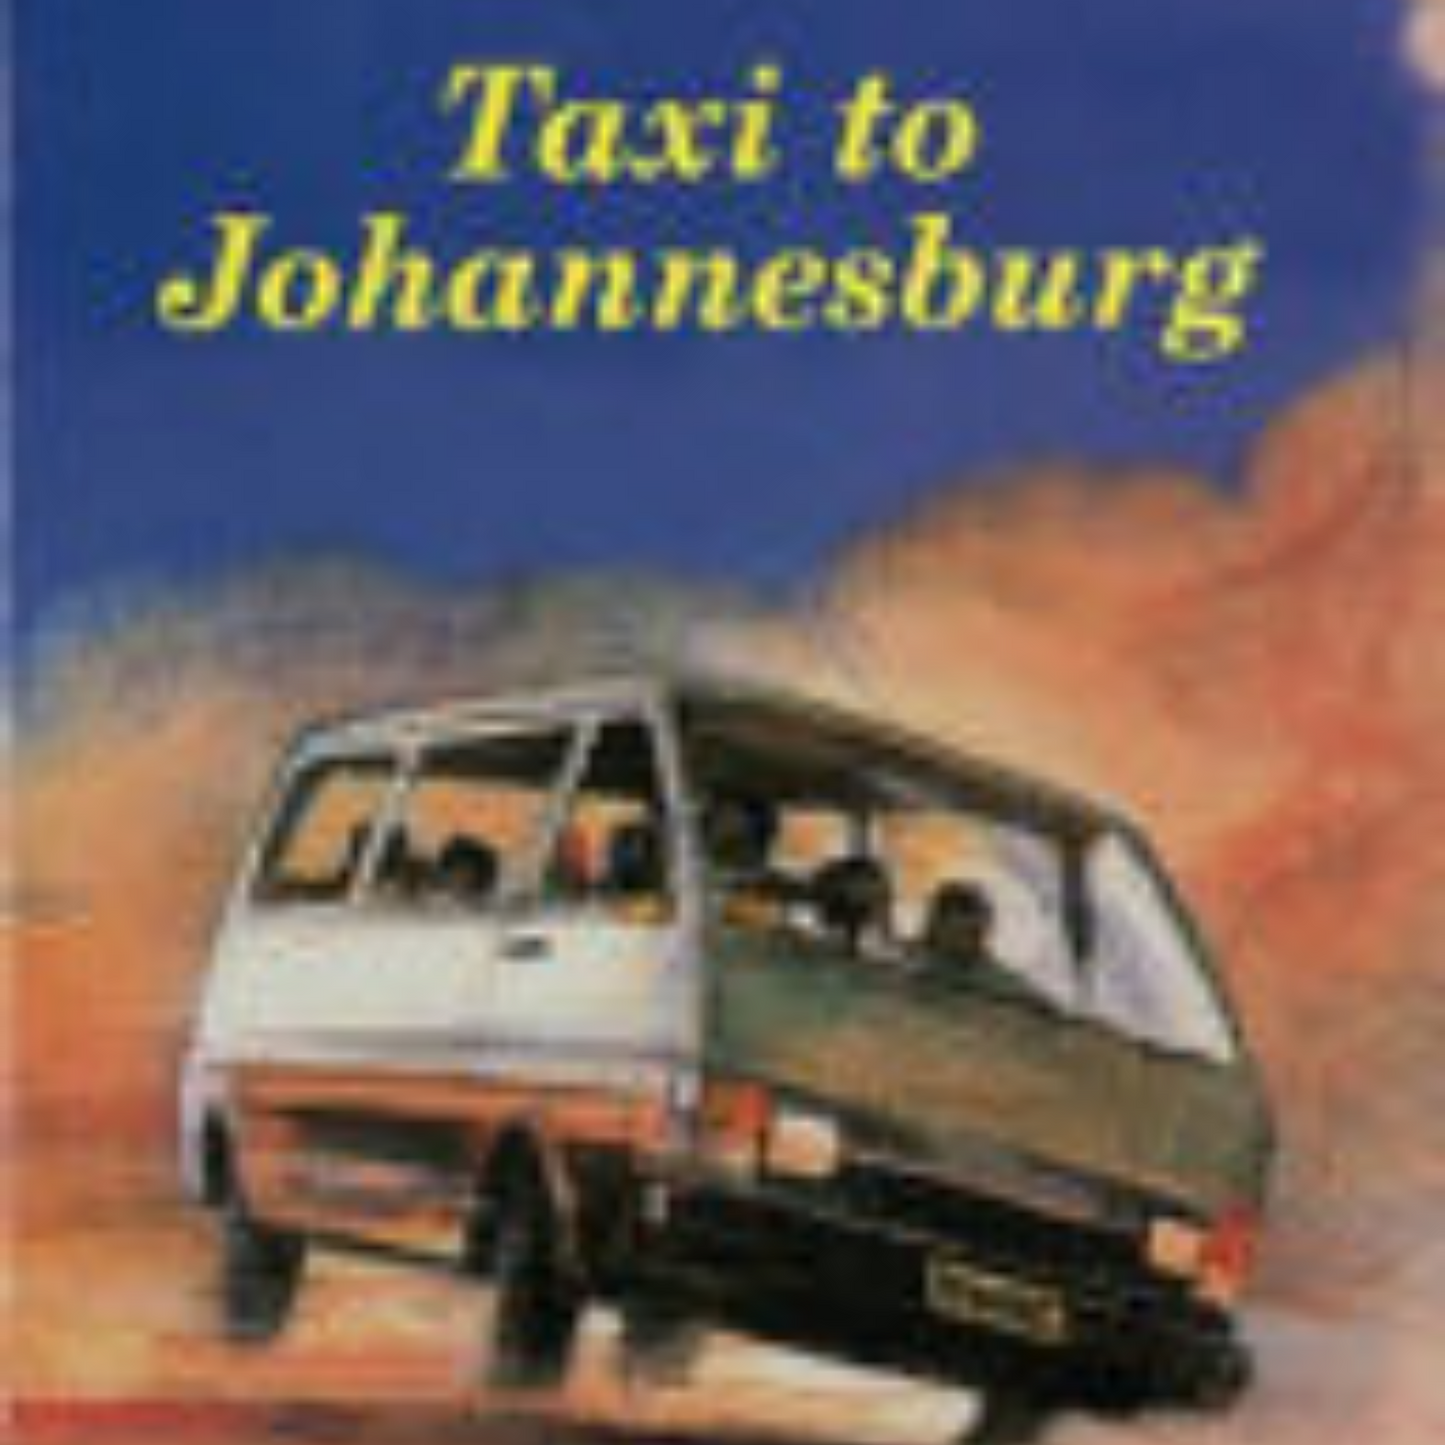 Taxi to Johannesburg